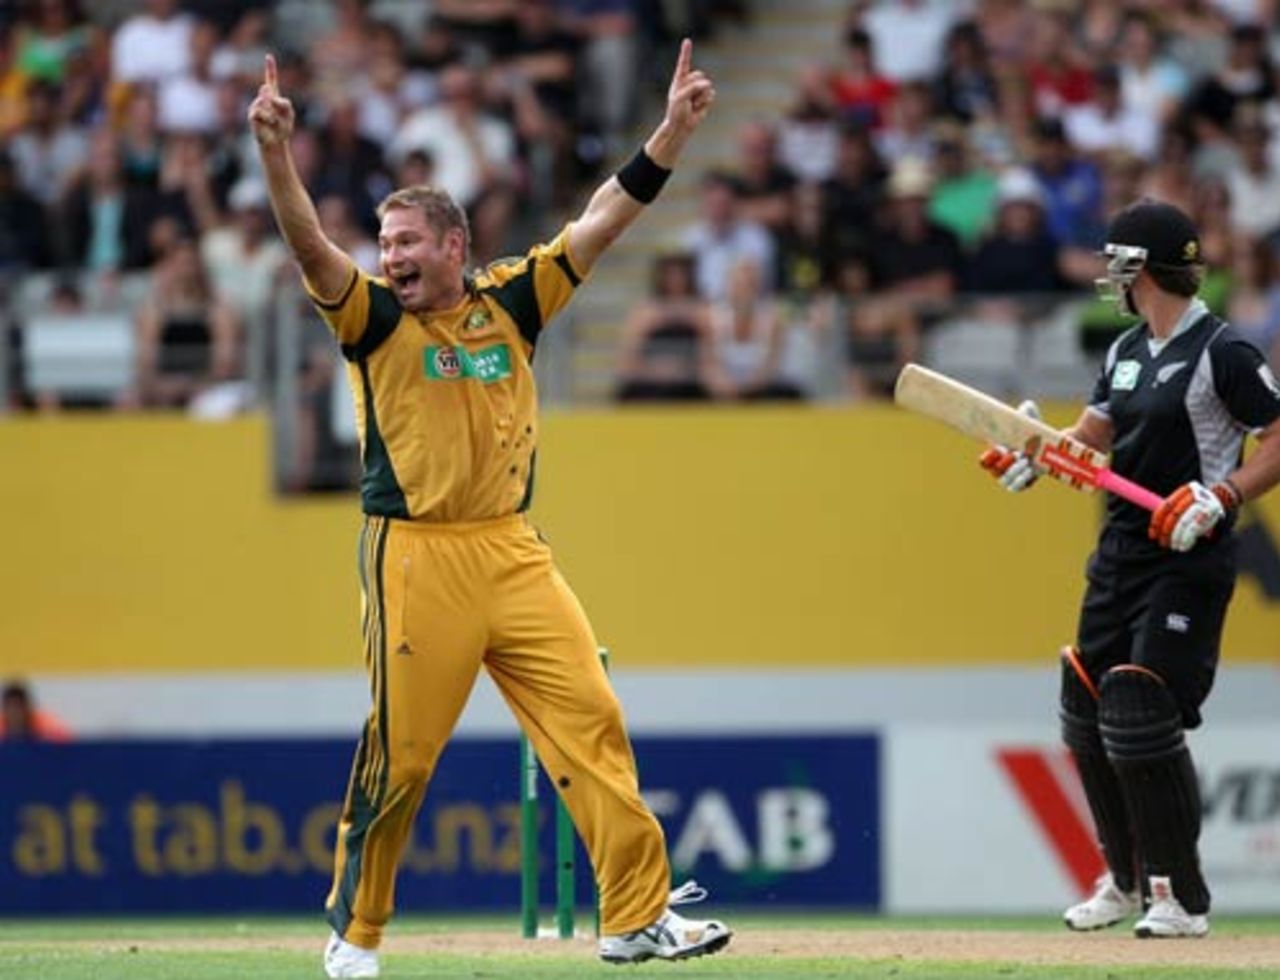 Ryan Harris celebrates trapping Neil Broom first ball, New Zealand v Australia, 2nd ODI, Auckland, March 6, 2010